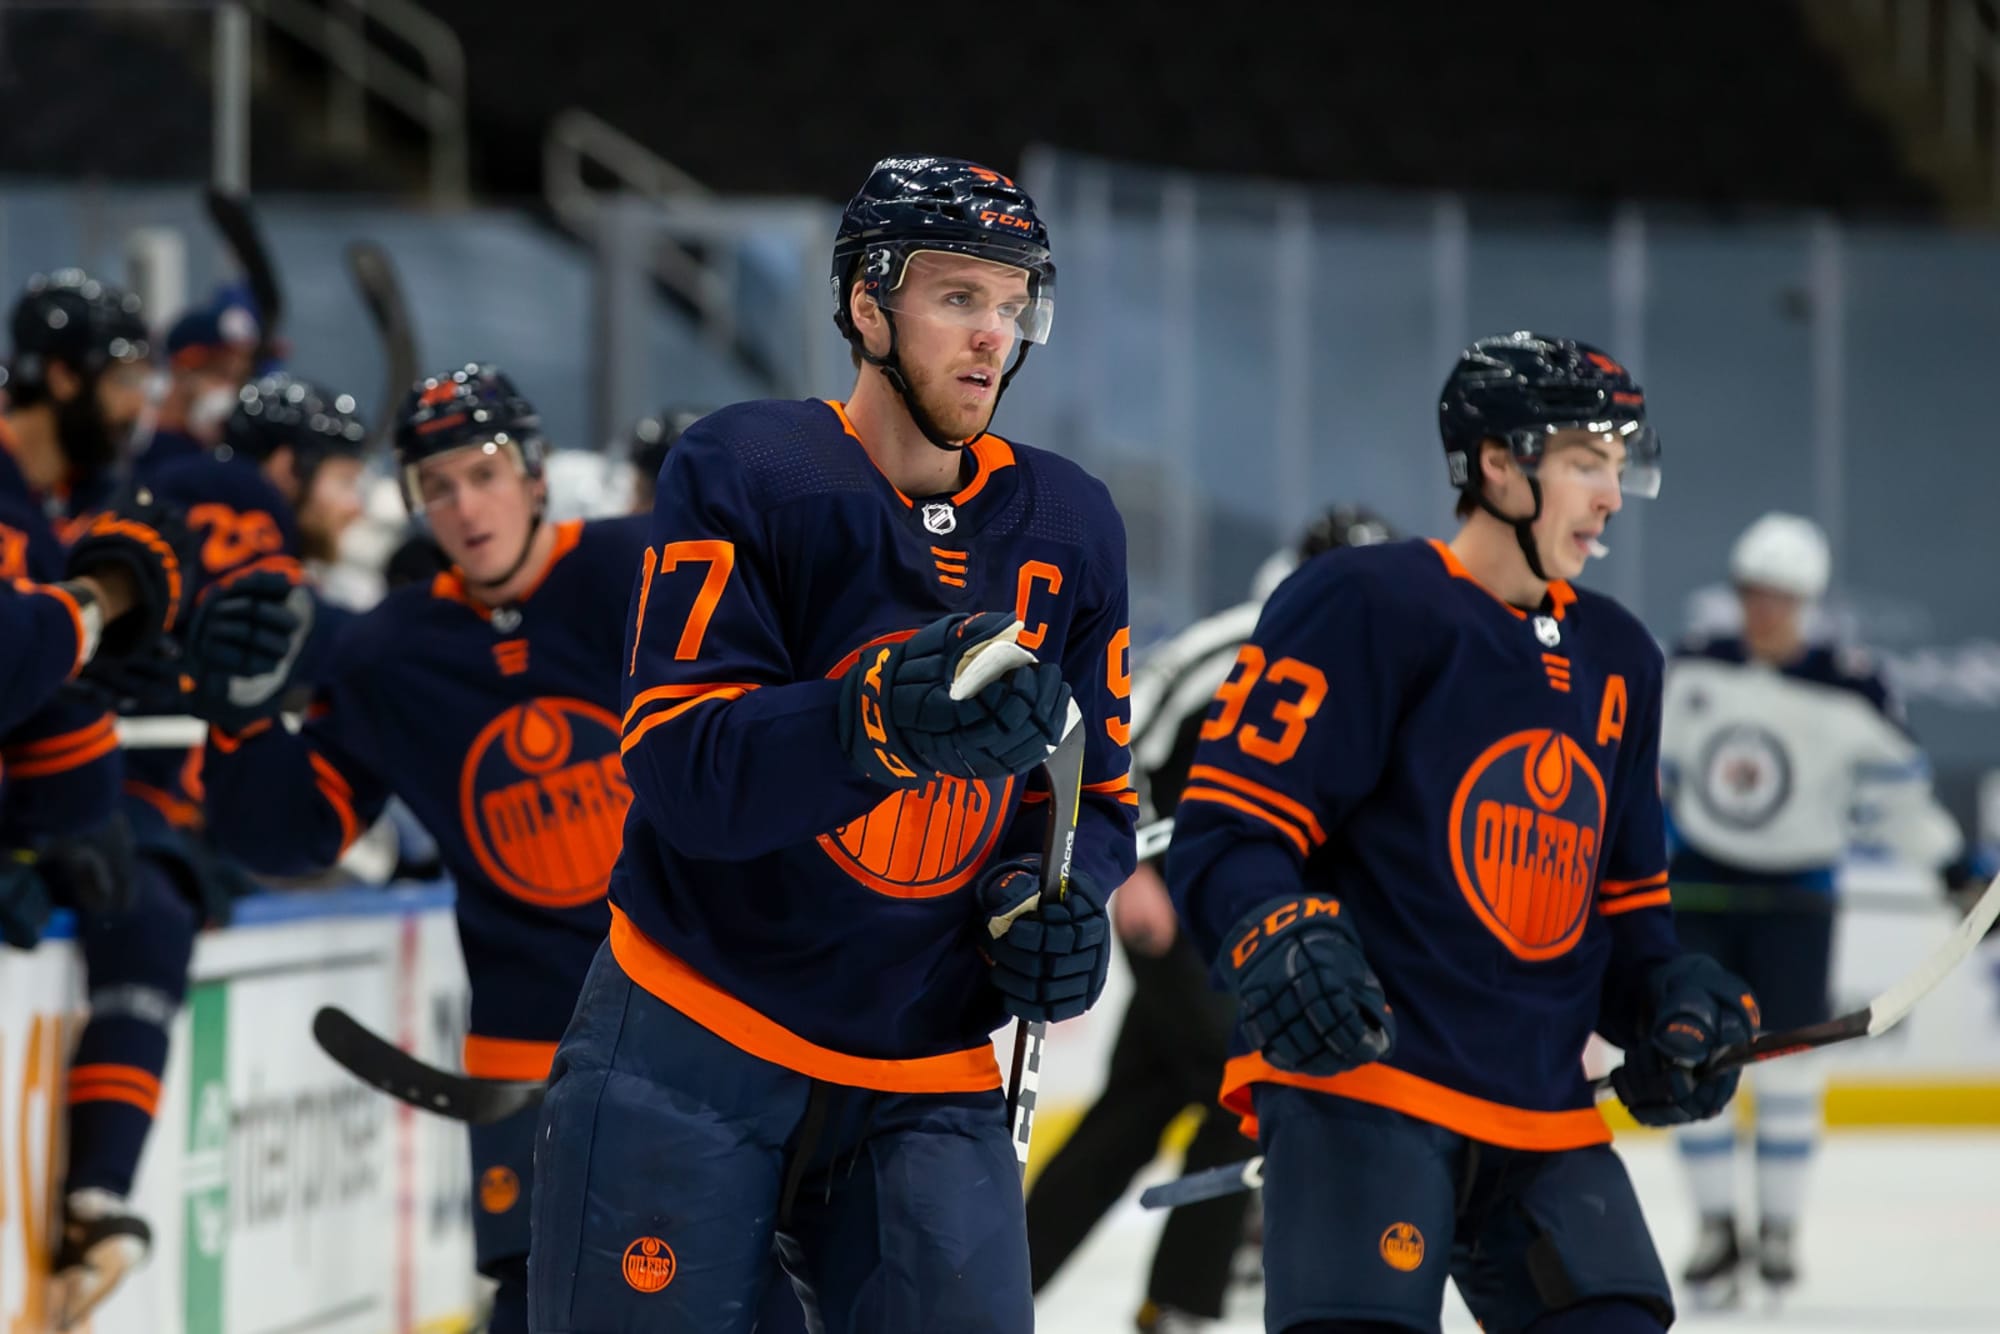 Connor McDavid Getting Closer to 100 Points in 56 Games - The New